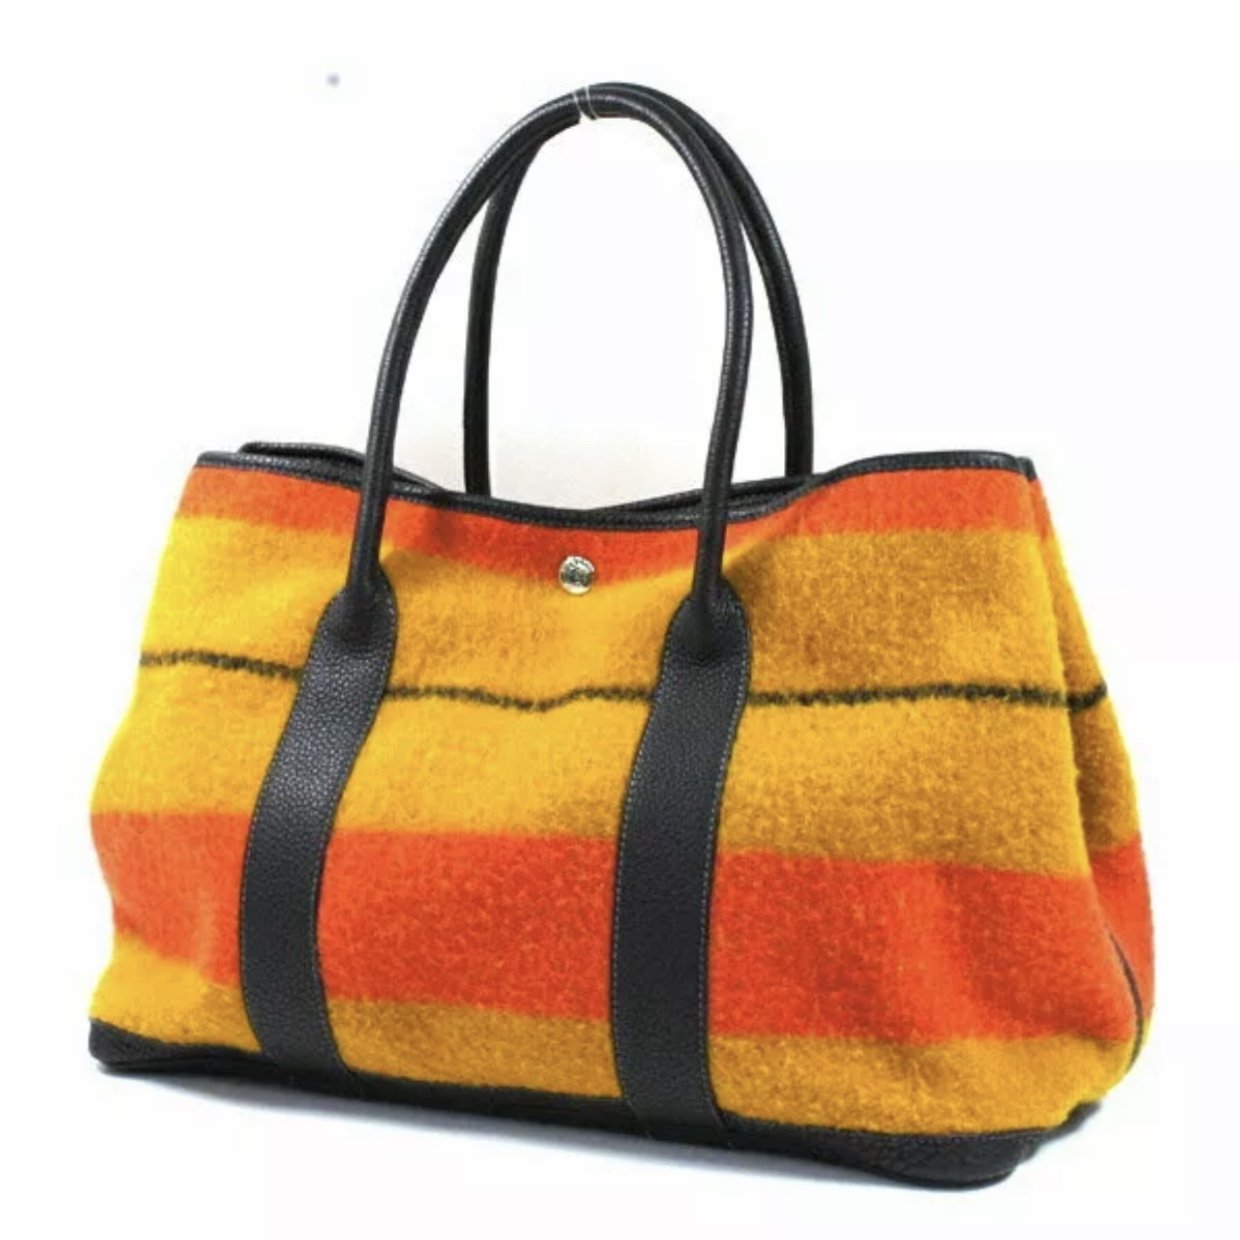 Hermes Garden Party Striped Tote